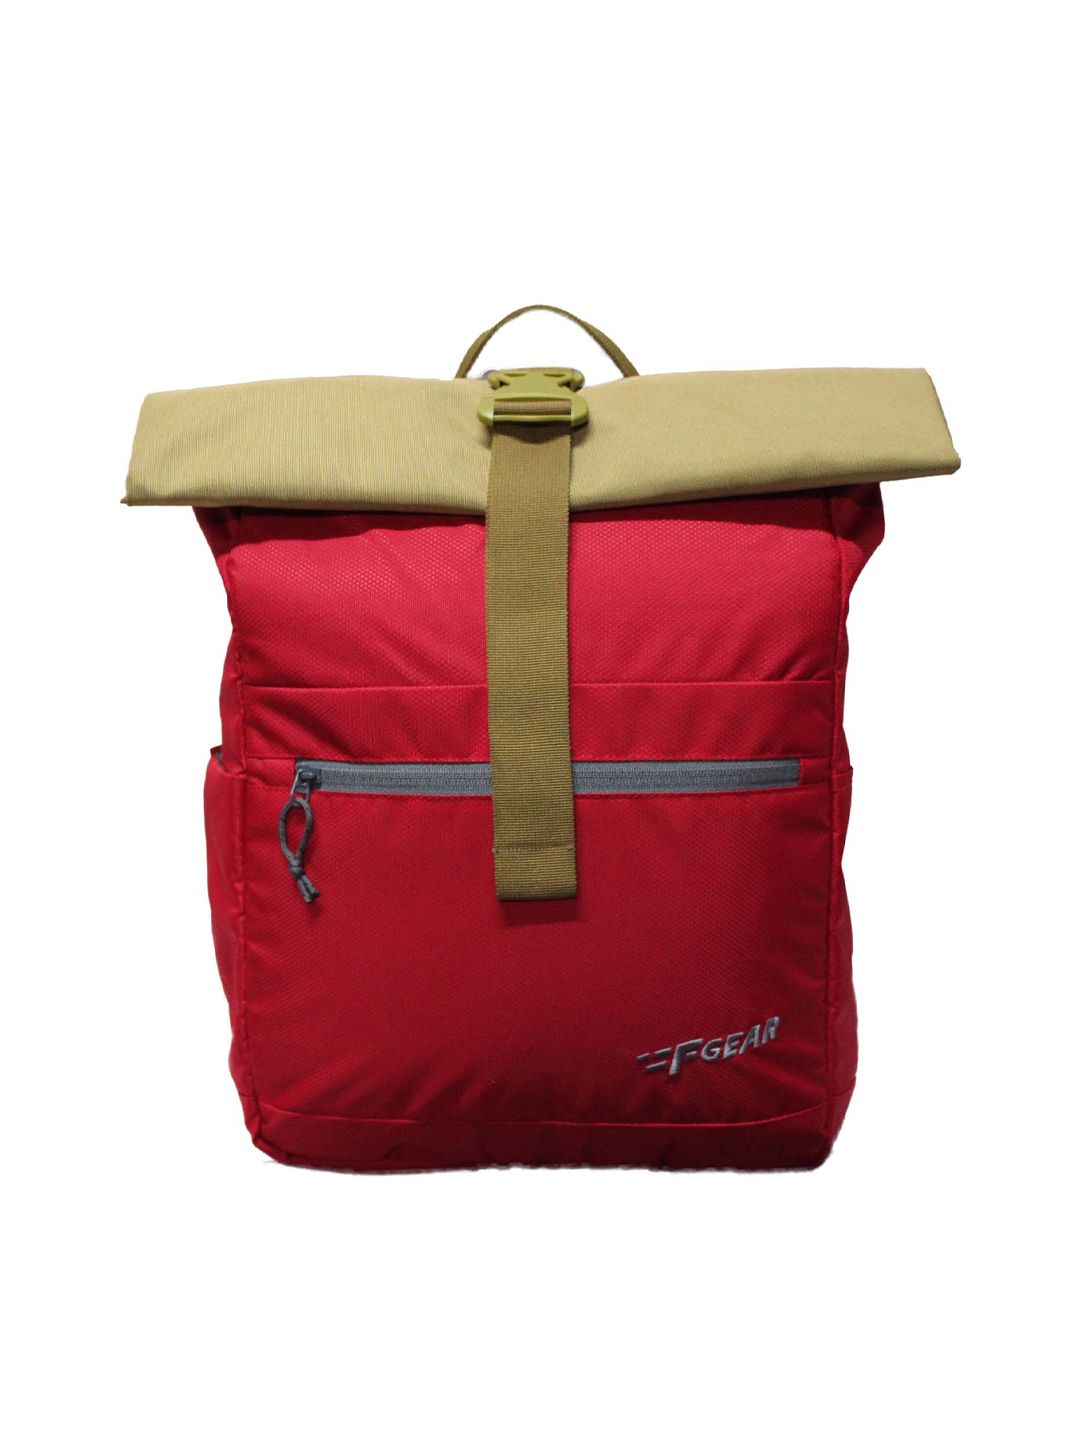 F Gear Unisex Red & Olive Green Backpack Price in India